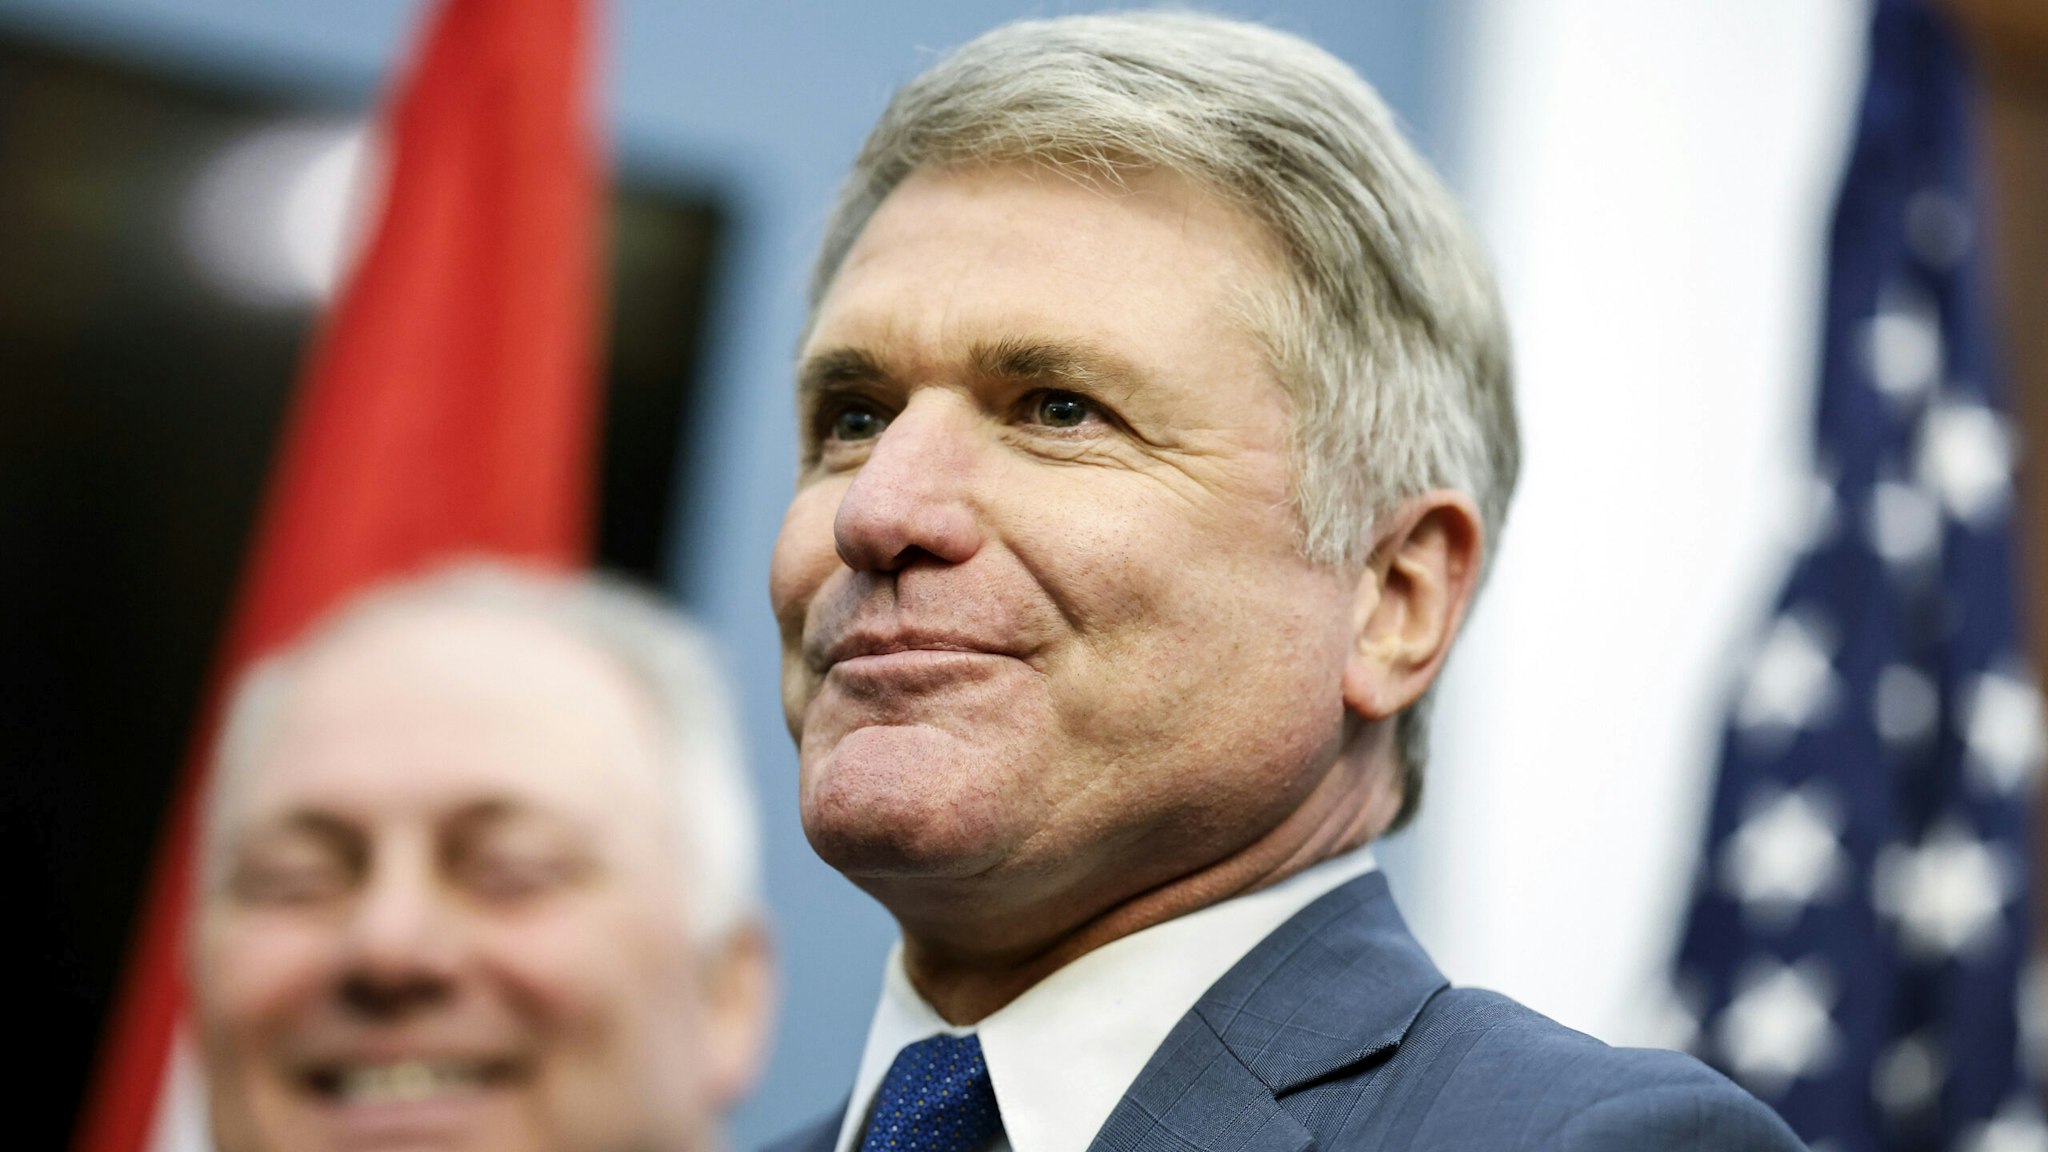 WASHINGTON, DC - JUNE 05: House Foreign Affairs Committee Chairman Rep. Michael McCaul (R-TX) speaks at an event to relaunch of the Congressional Friends of Denmark Caucus at the U.S. Capitol Building on June 05, 2023 in Washington, DC. Prime Minister Mette Frederiksen of Denmark attended the event with congressional lawmakers after visiting with U.S. President Joe Biden at the White House.